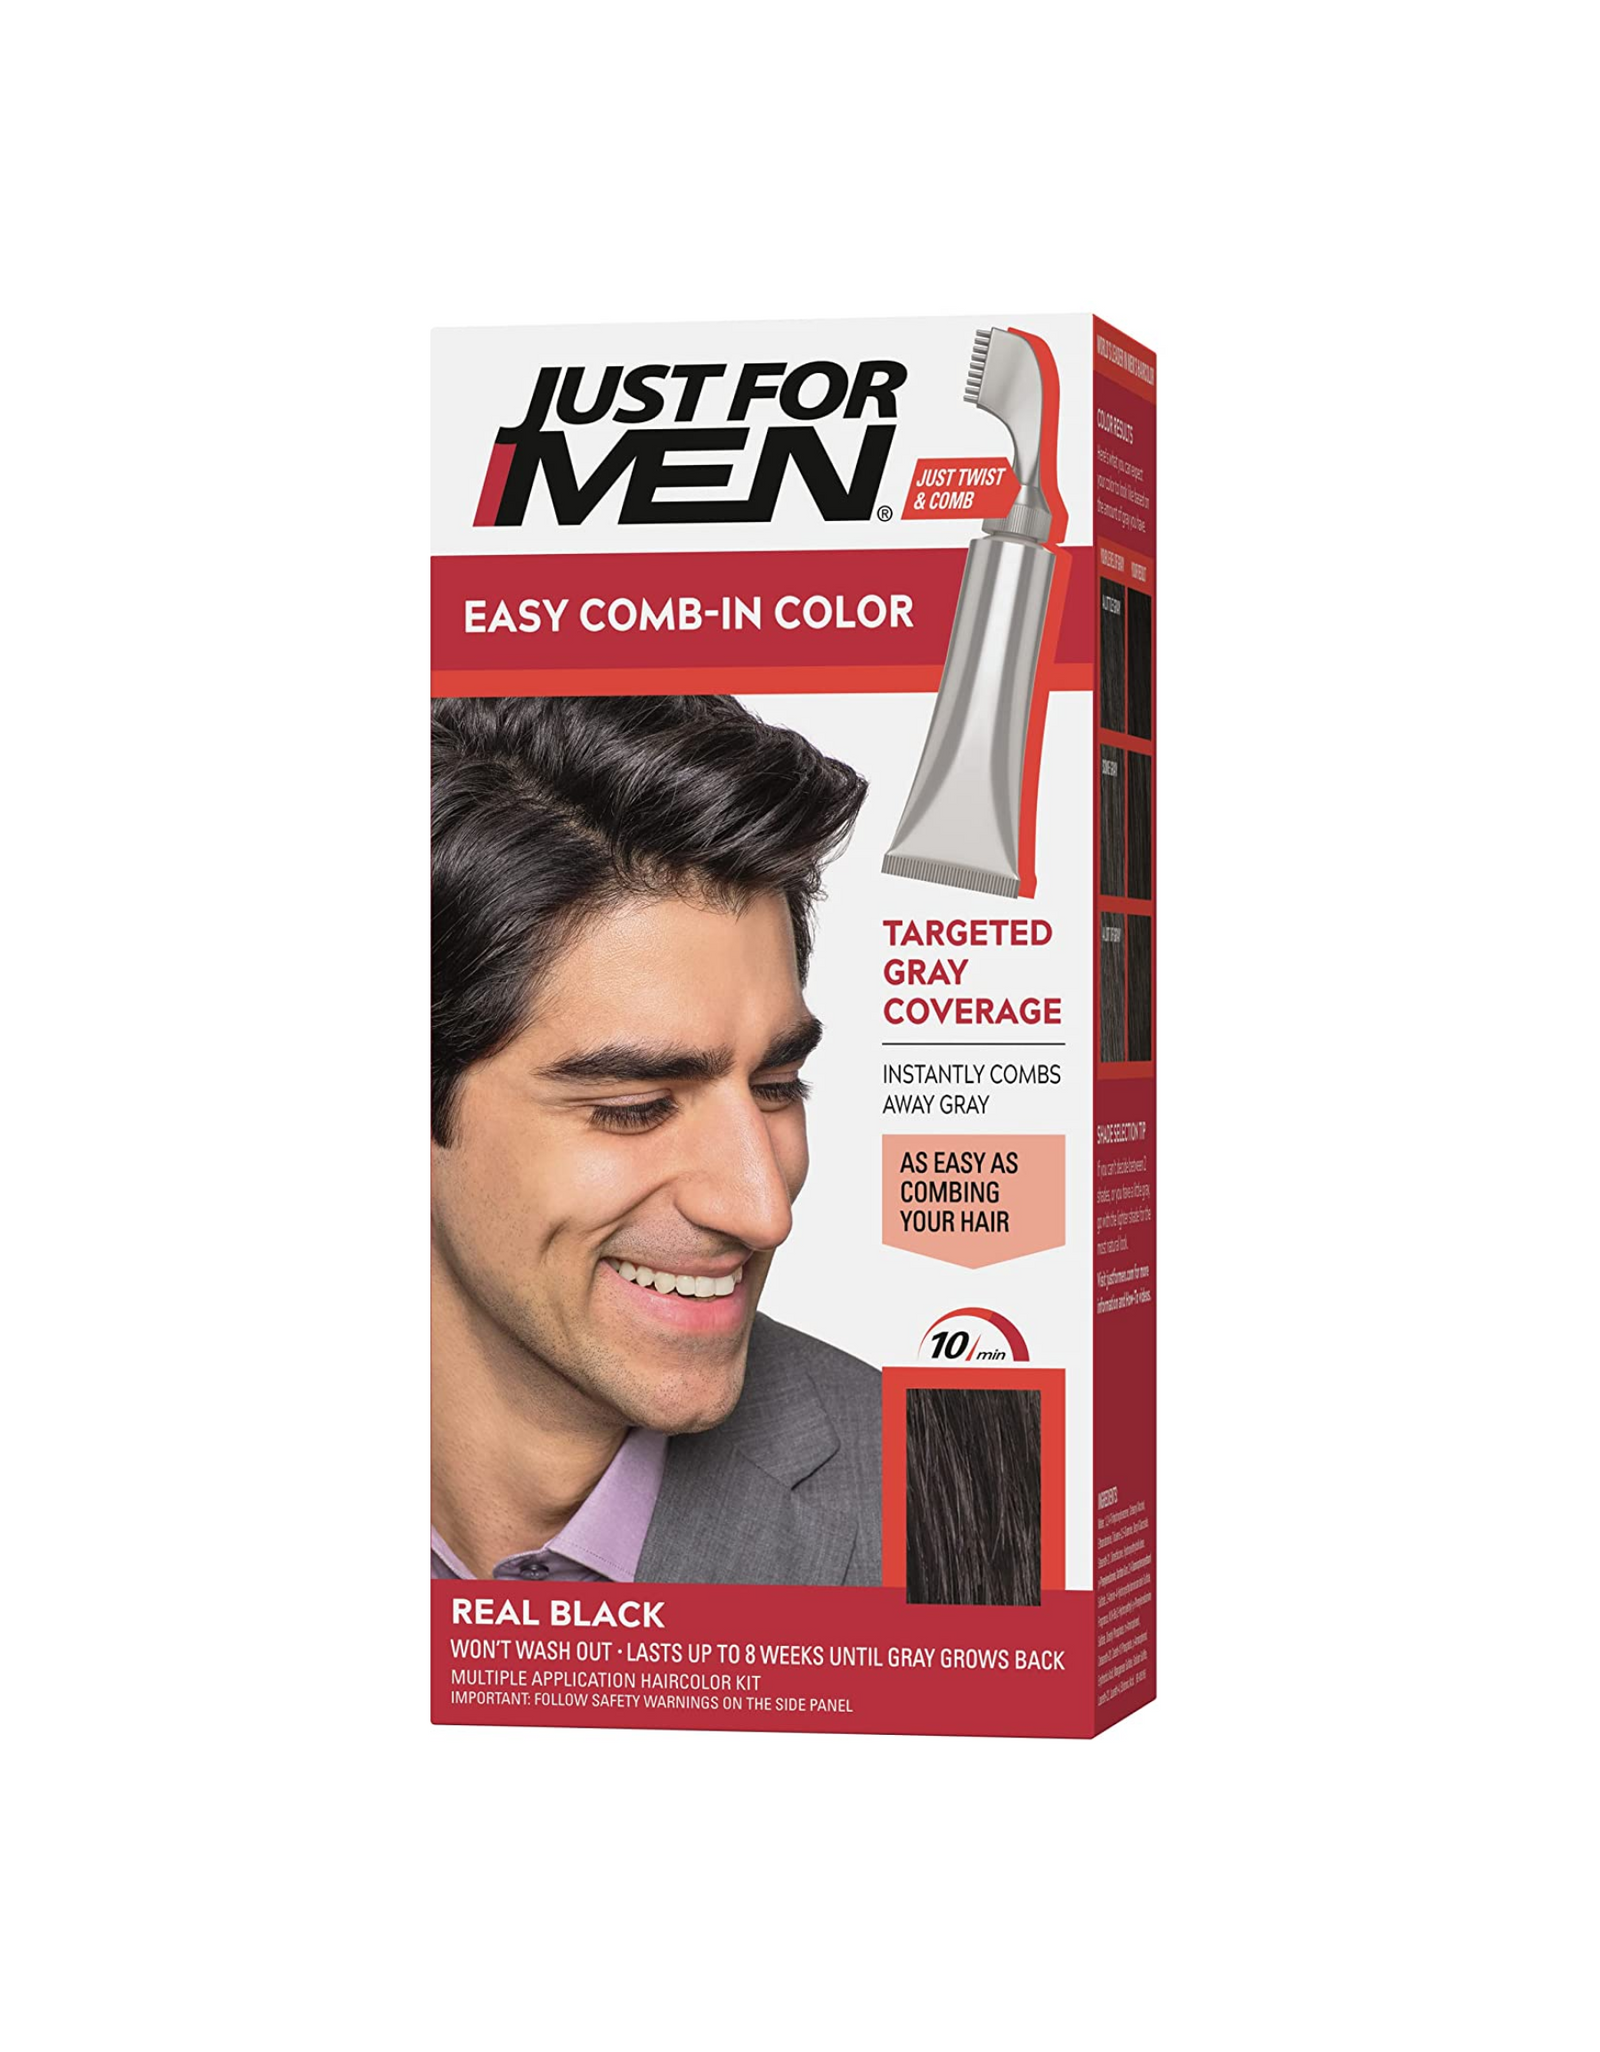 Just For Men Easy Comb-In Color Mens Hair Dye, Real Black, 1 Ct (Pack of 1)